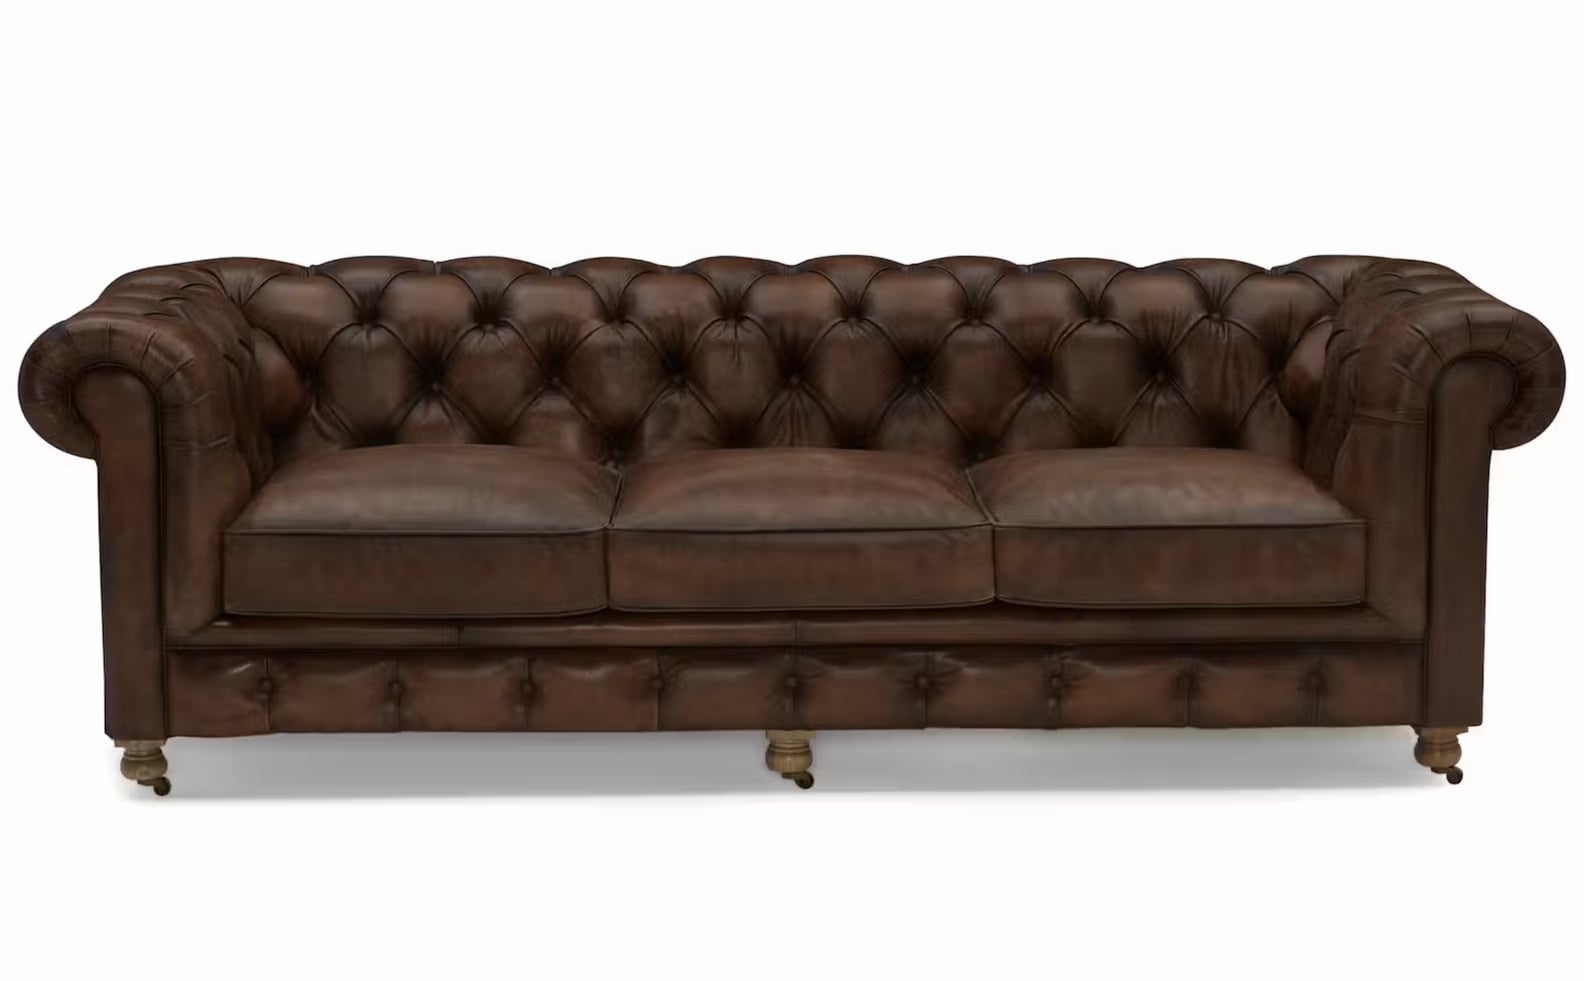 13 Best Leather Sofas and Sectionals for Every Home | POPSUGAR Home